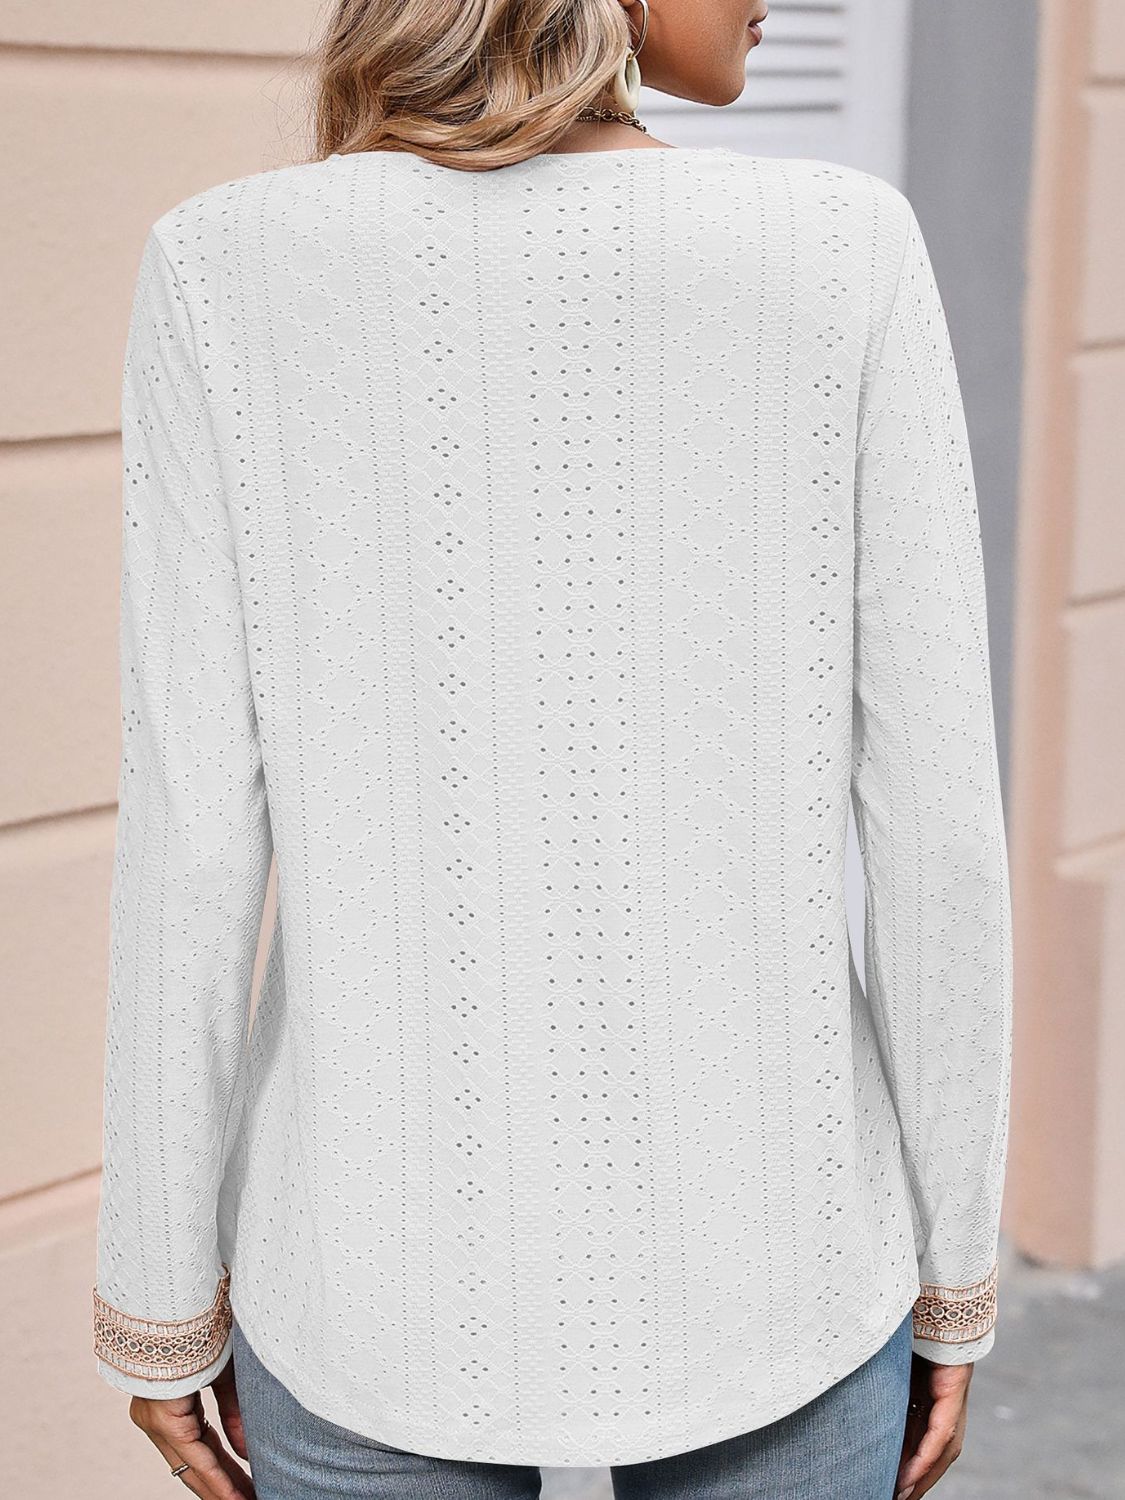 Light Gray Contrast V-Neck Eyelet Long Sleeve Top Clothes